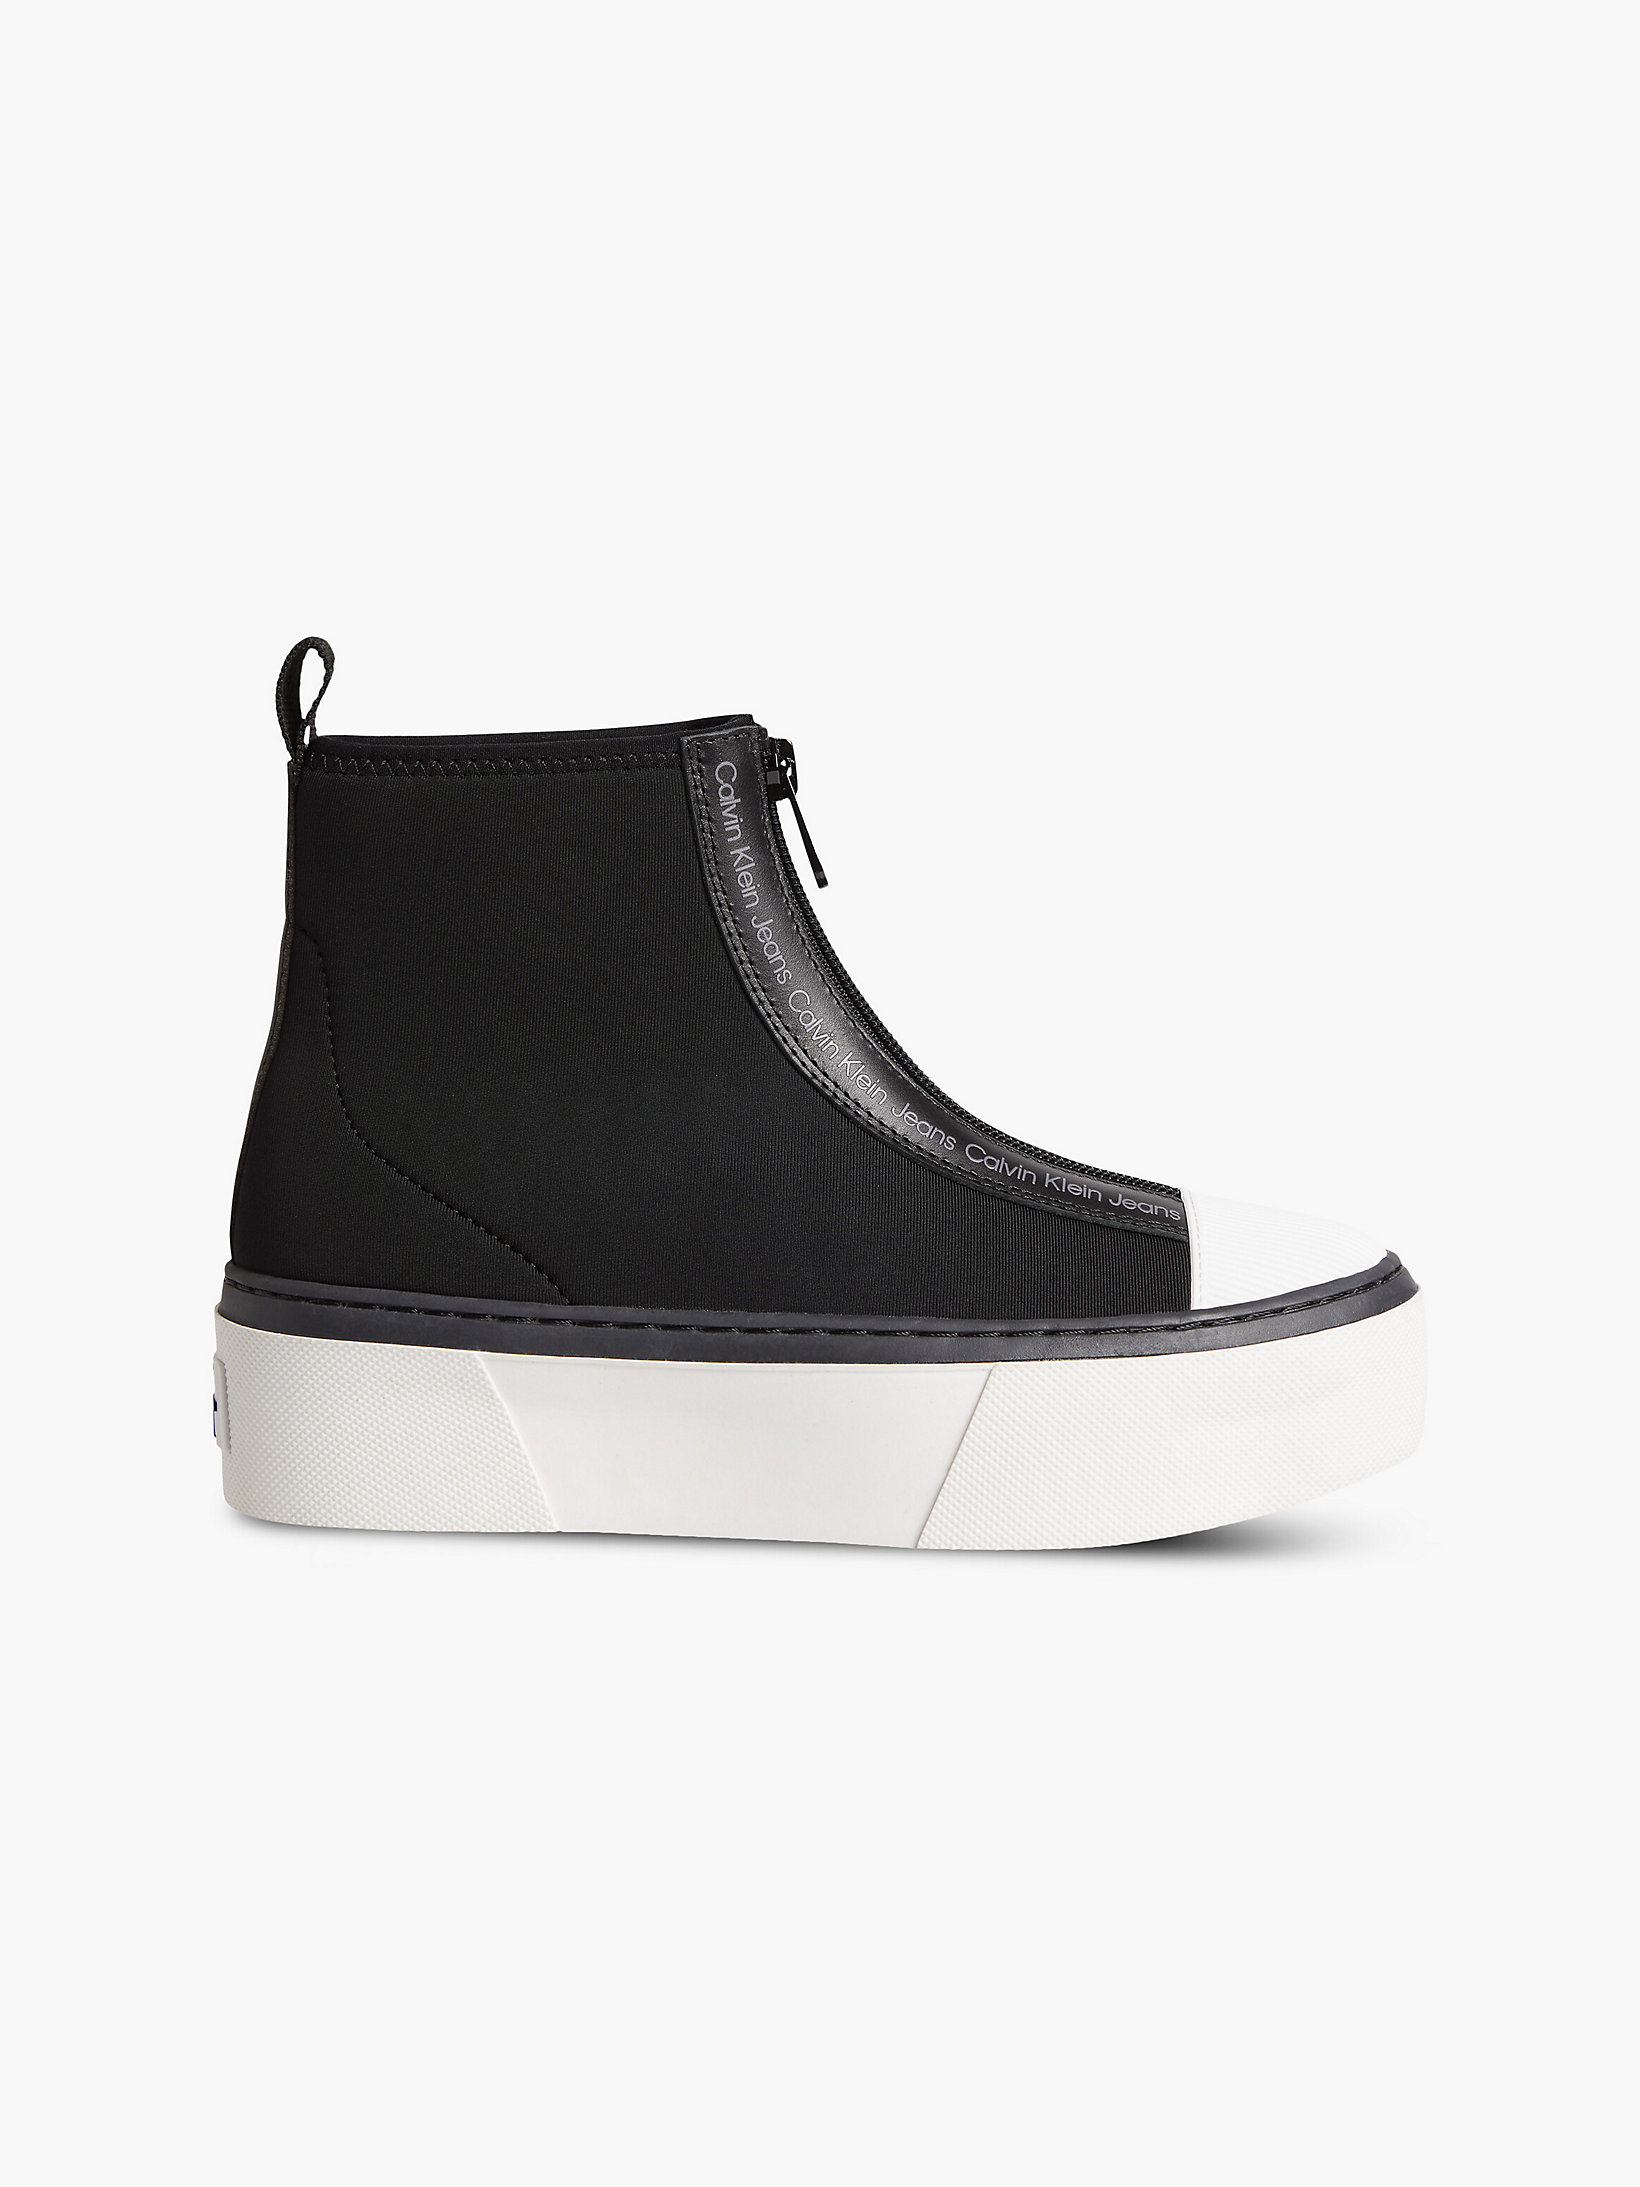 Black Recycled Neoprene High-Top Trainers undefined women Calvin Klein